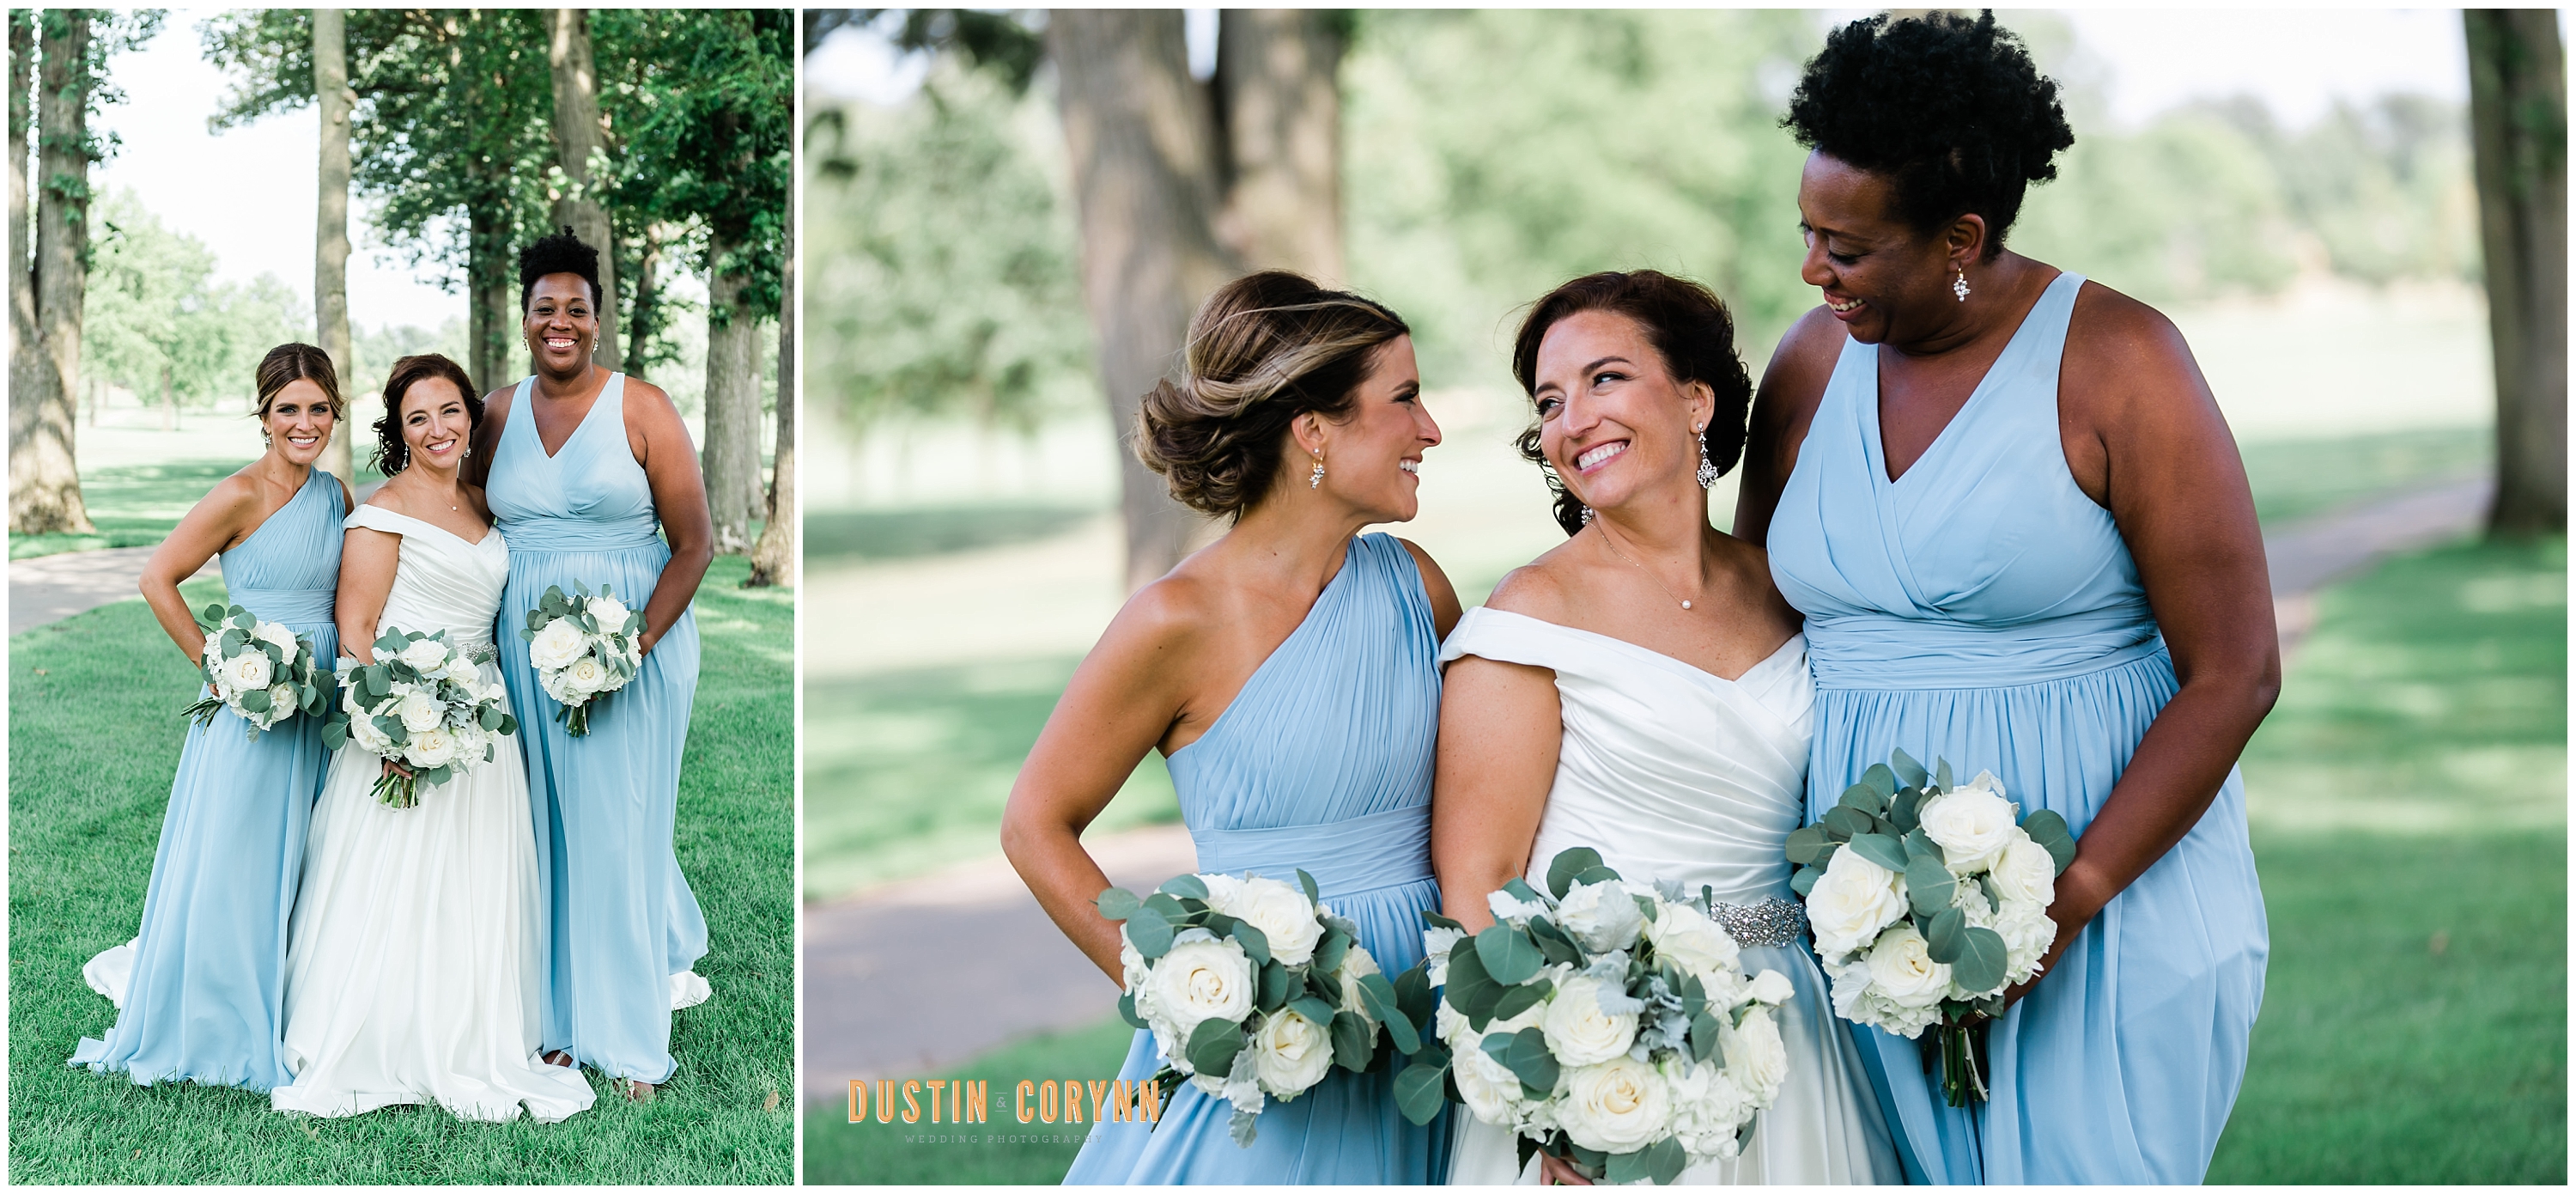 Bride and Bridesmaids at Pine Valley Country Club Wedding